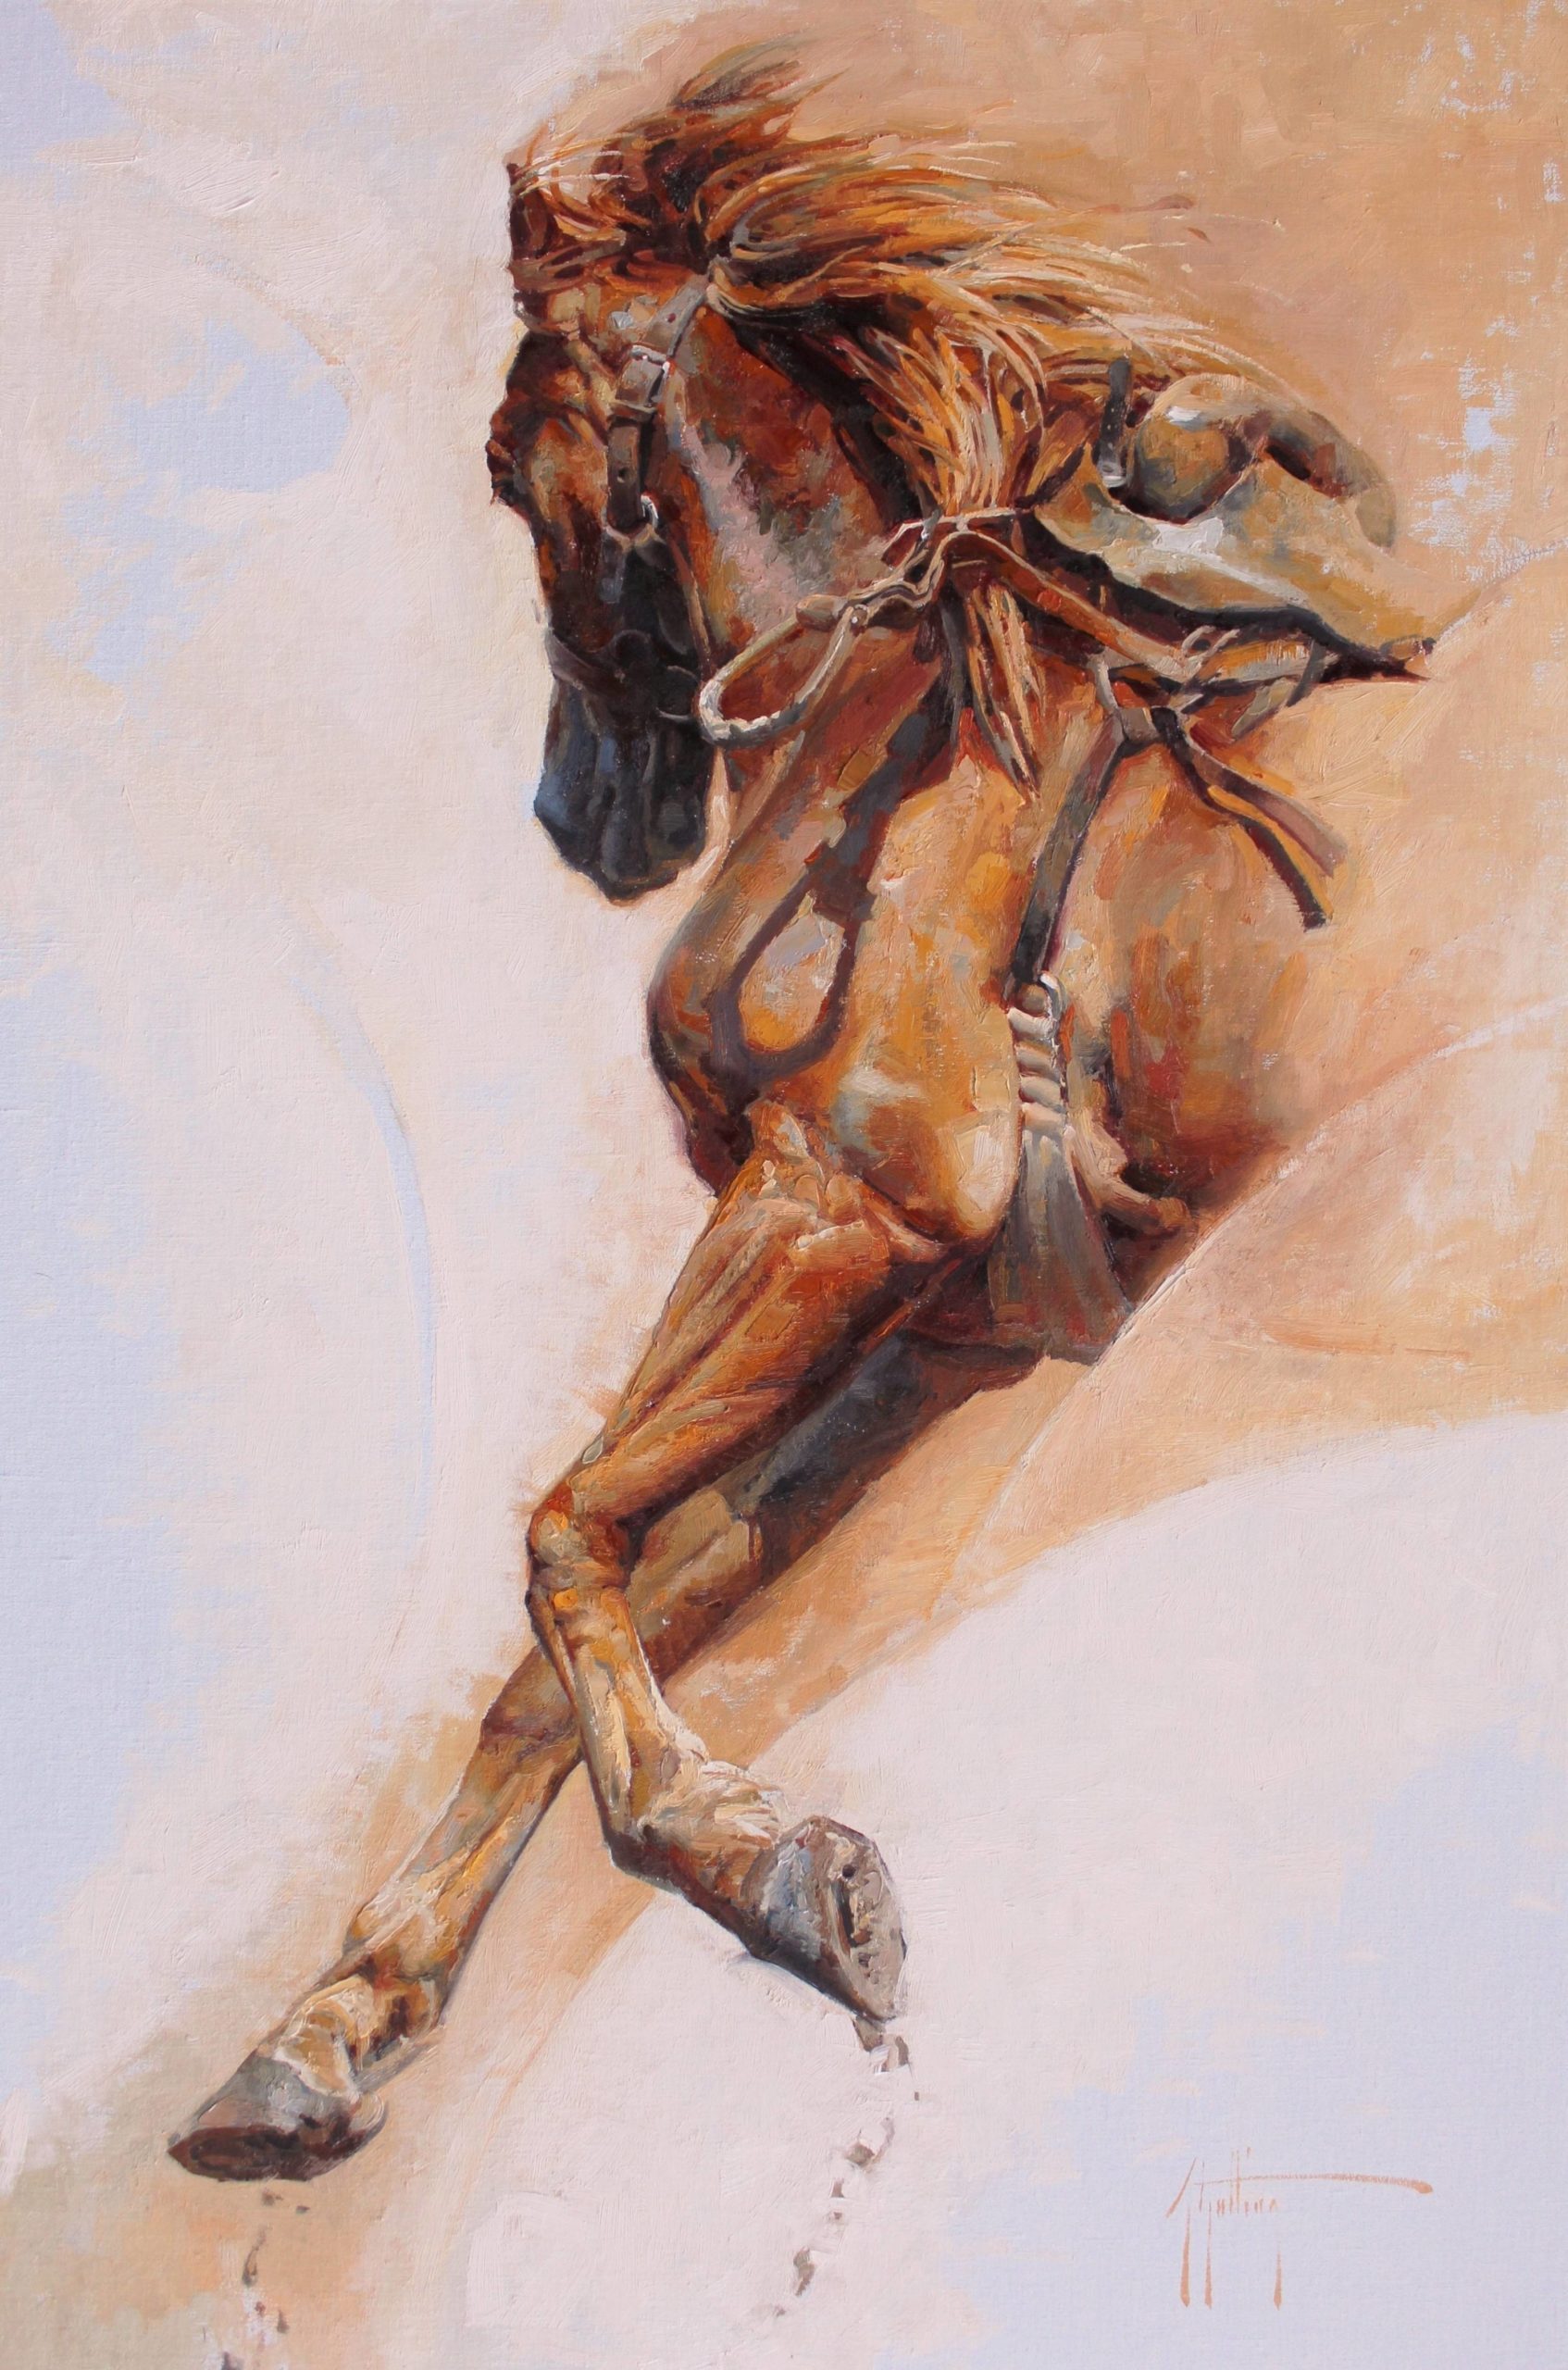 Western art - Abigail Gutting, "Pounding the Dust," 2022, Oil on linen, 26 x 24 inches, Image courtesy of the artist